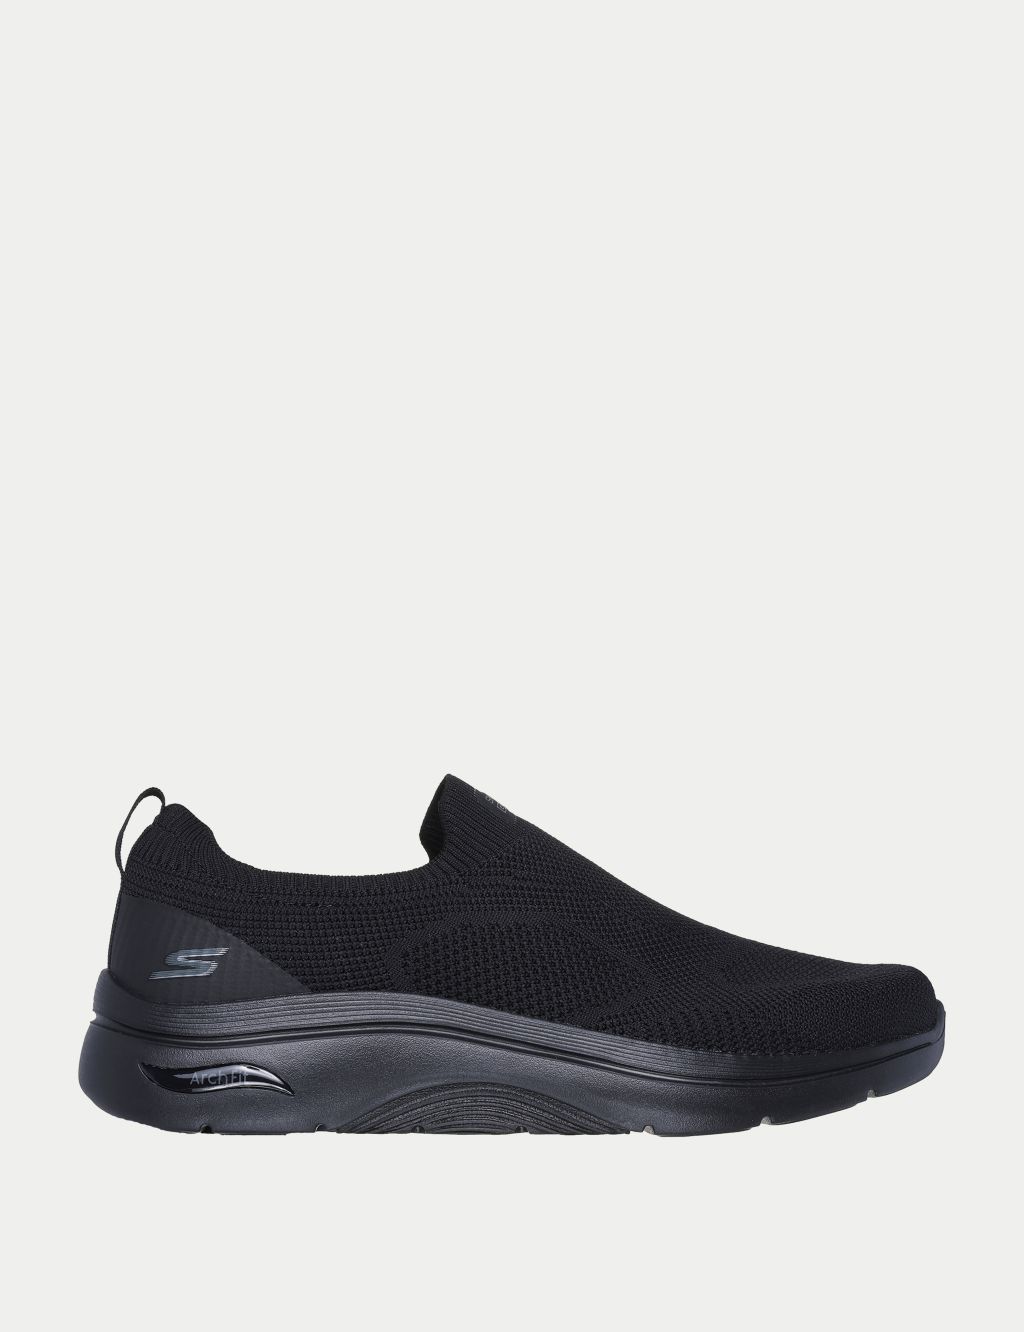 Go Walk Arch Fit 2.0 Slip-On Trainers